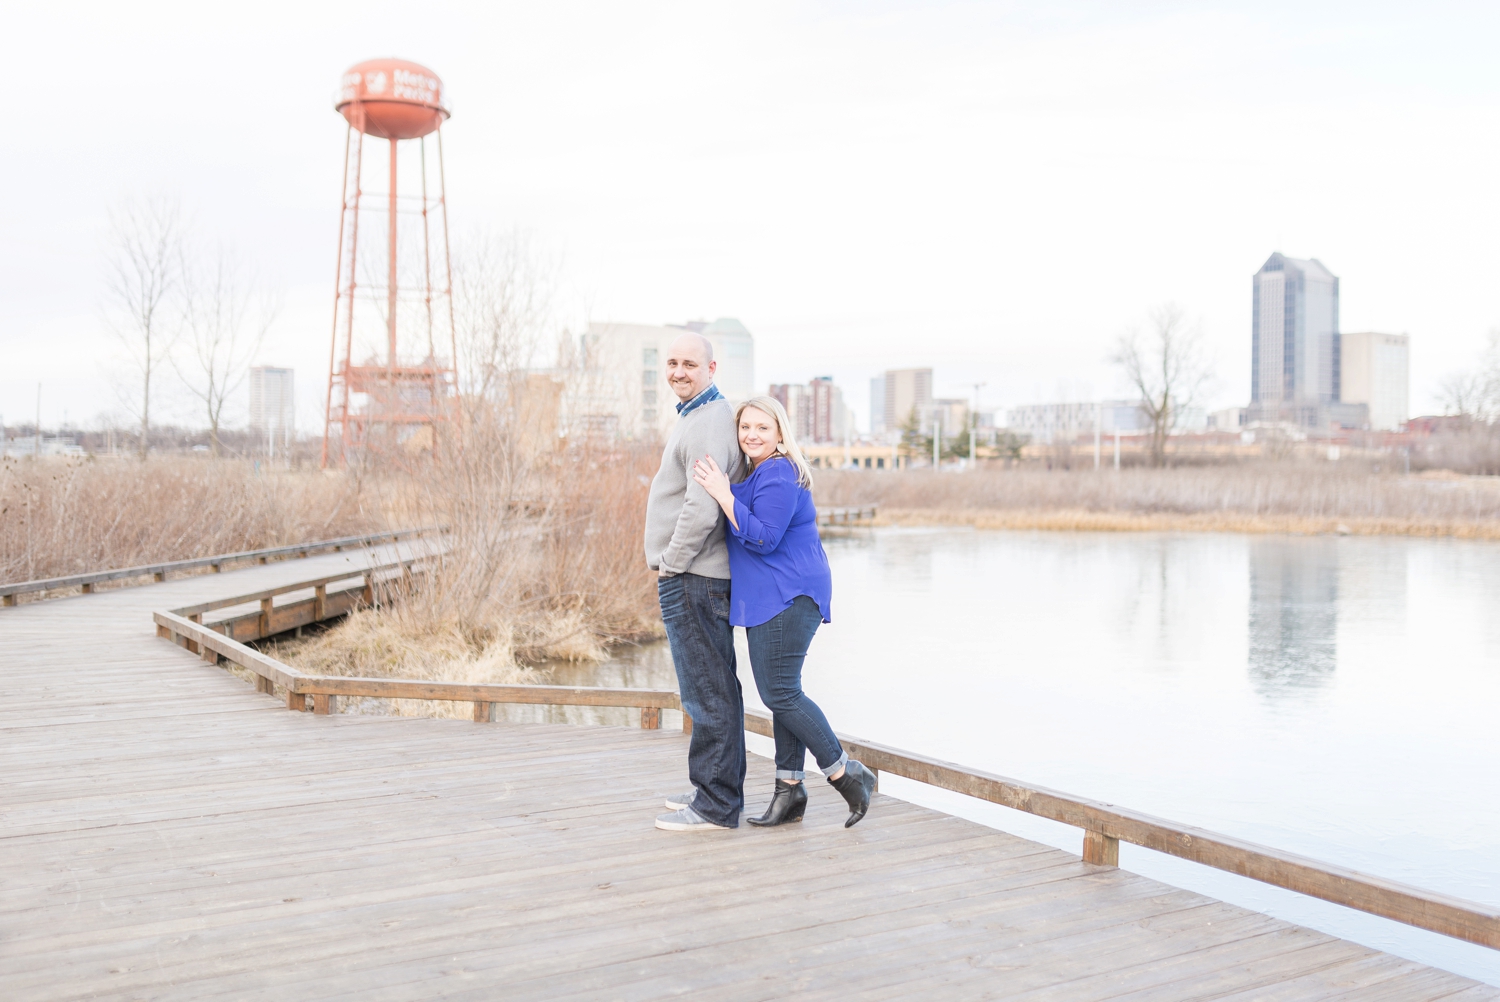 winter-engaged-couple-at-their-photo-session-at-the-scioto-audubon-park-near-grange-audubon-center-with-walkways-and-grass_0352